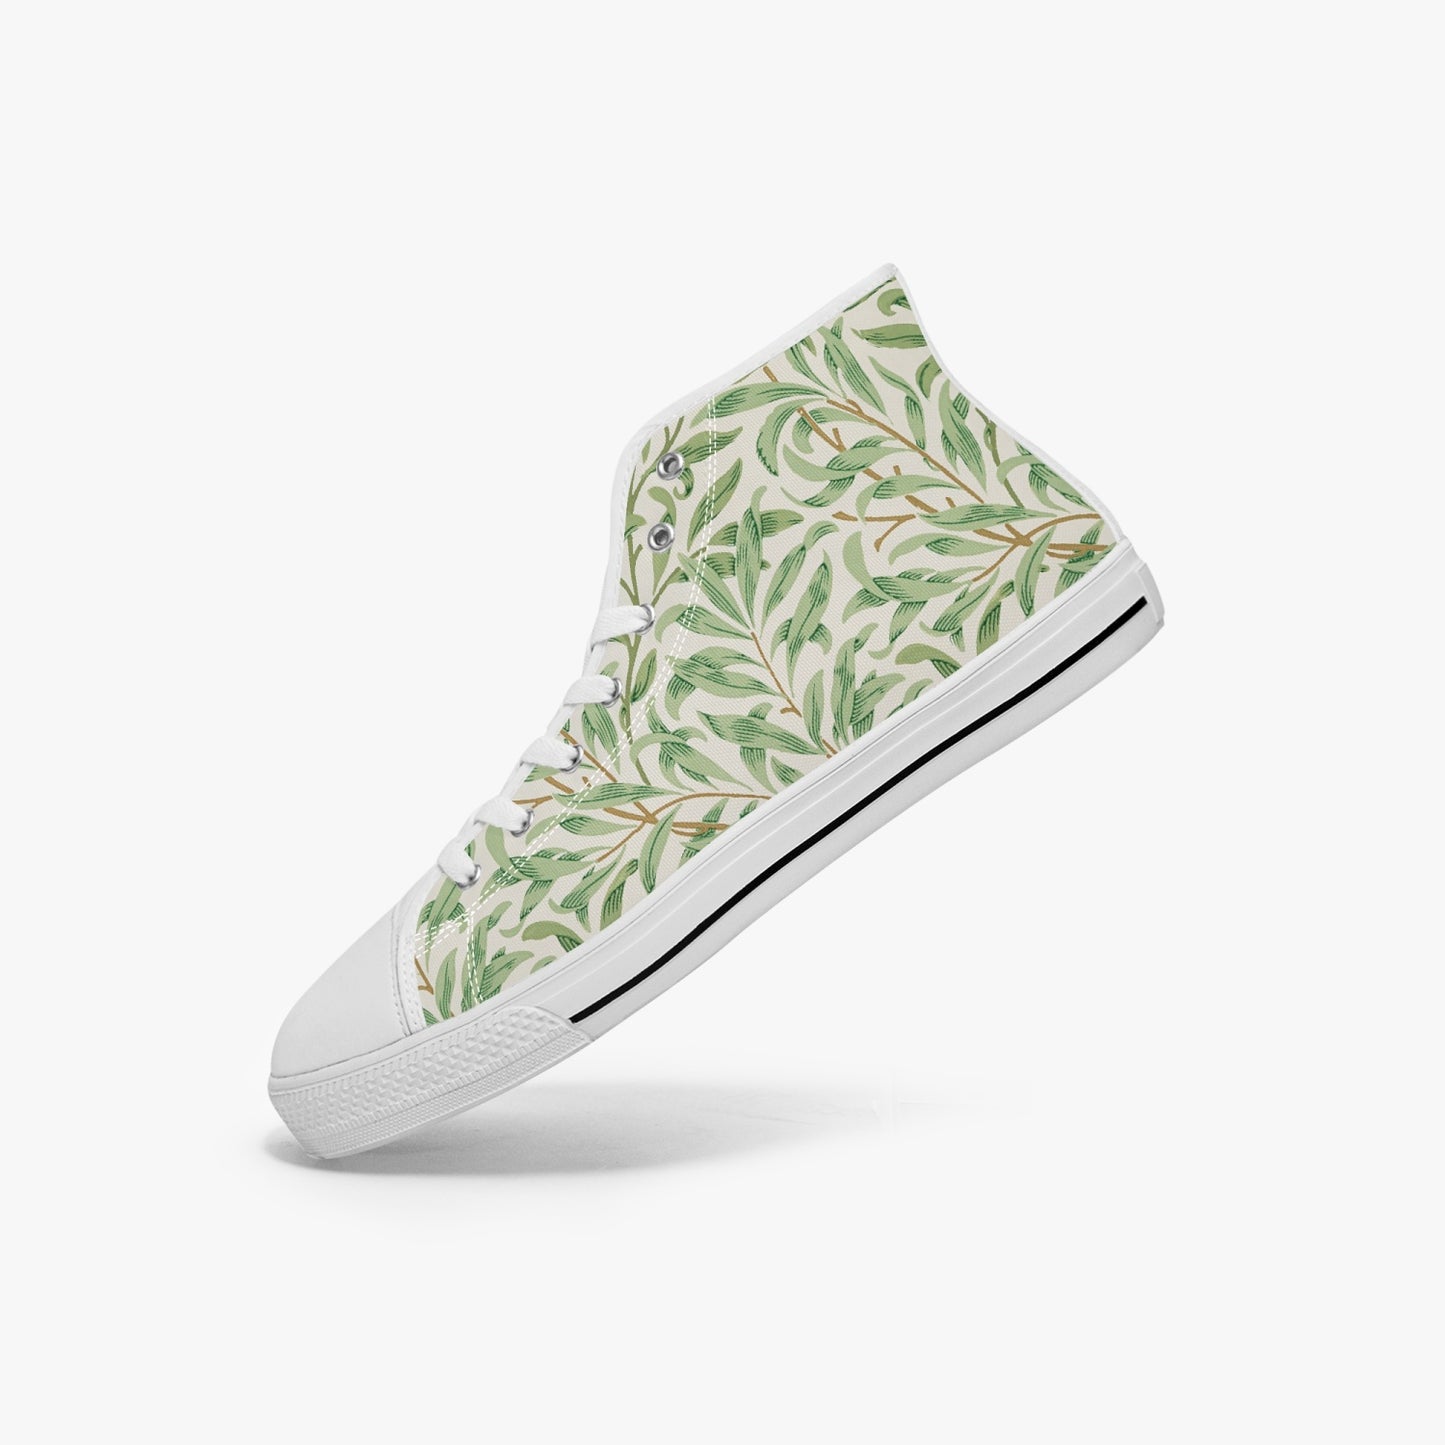 Flowered Sneakers: Canvas High-Tops with Willow Boughs William Morris Wallpaper Design